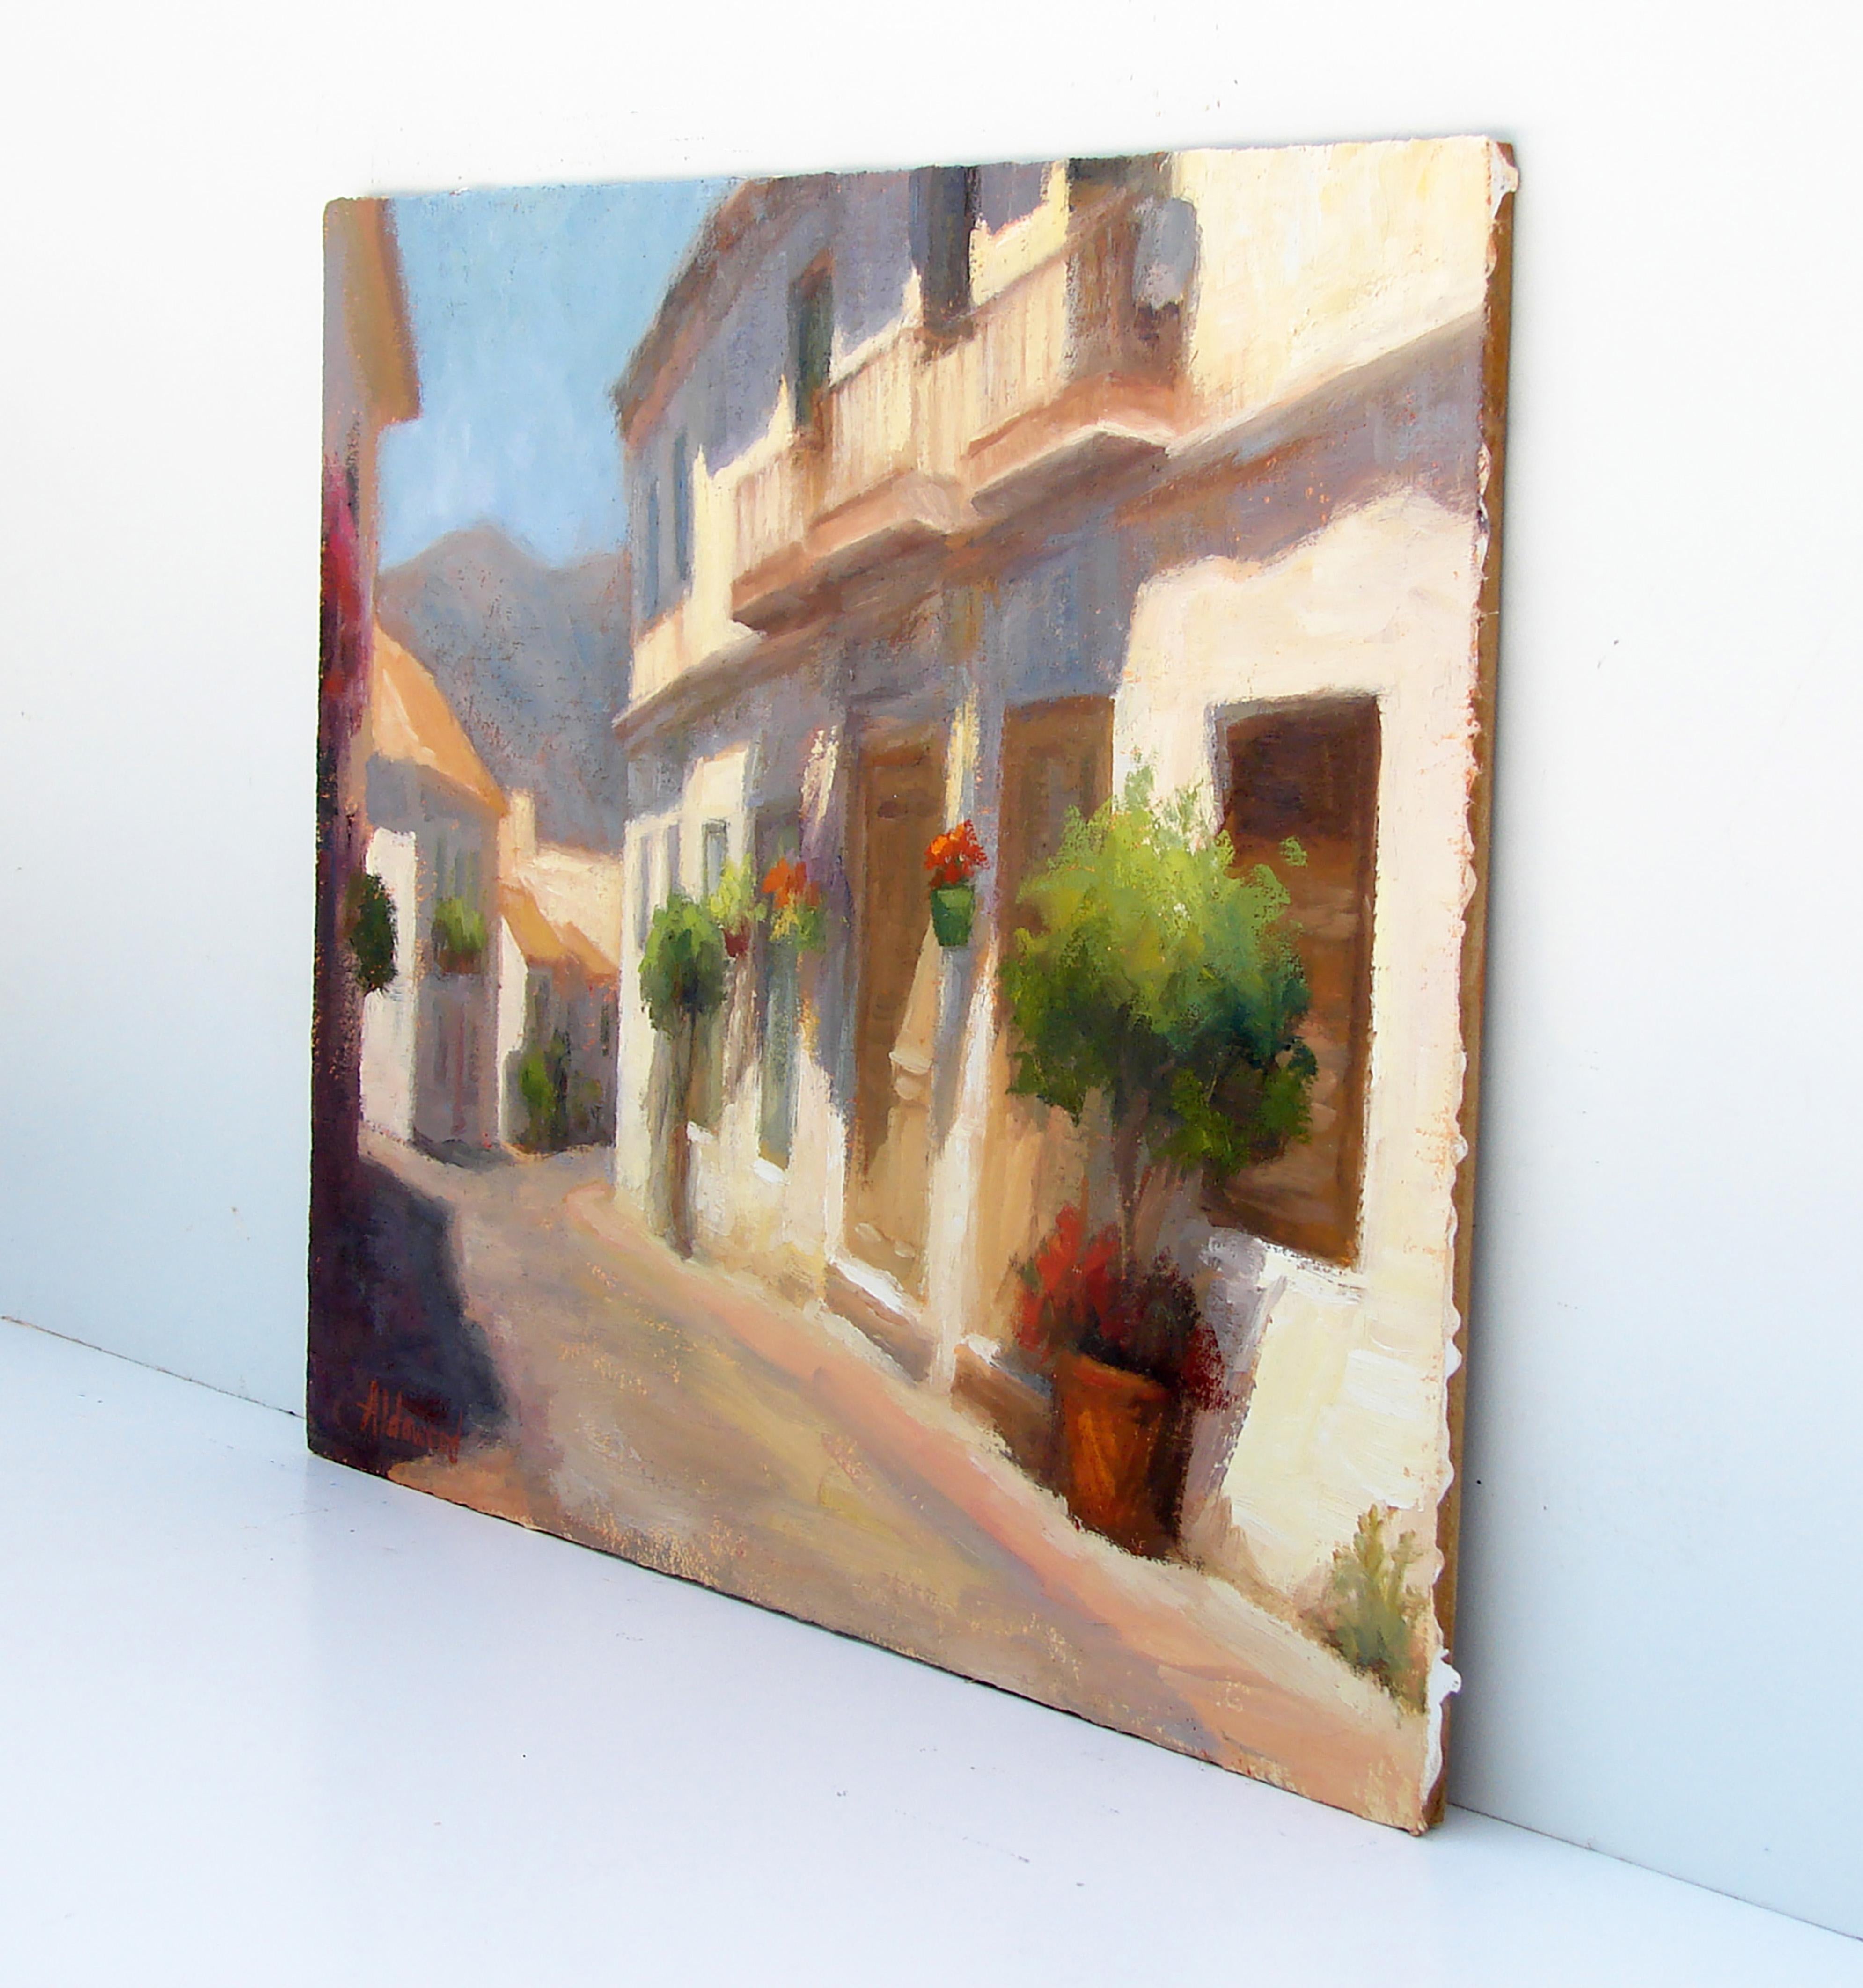 <p>Artist Comments<br>Potted plants and flowers decorate the sun-washed white buildings of Estepona, Spain. The streets exude an idyllic and peaceful atmosphere, portrayed with soft brushwork that conveys a sense of leisure and relaxation. Gentle